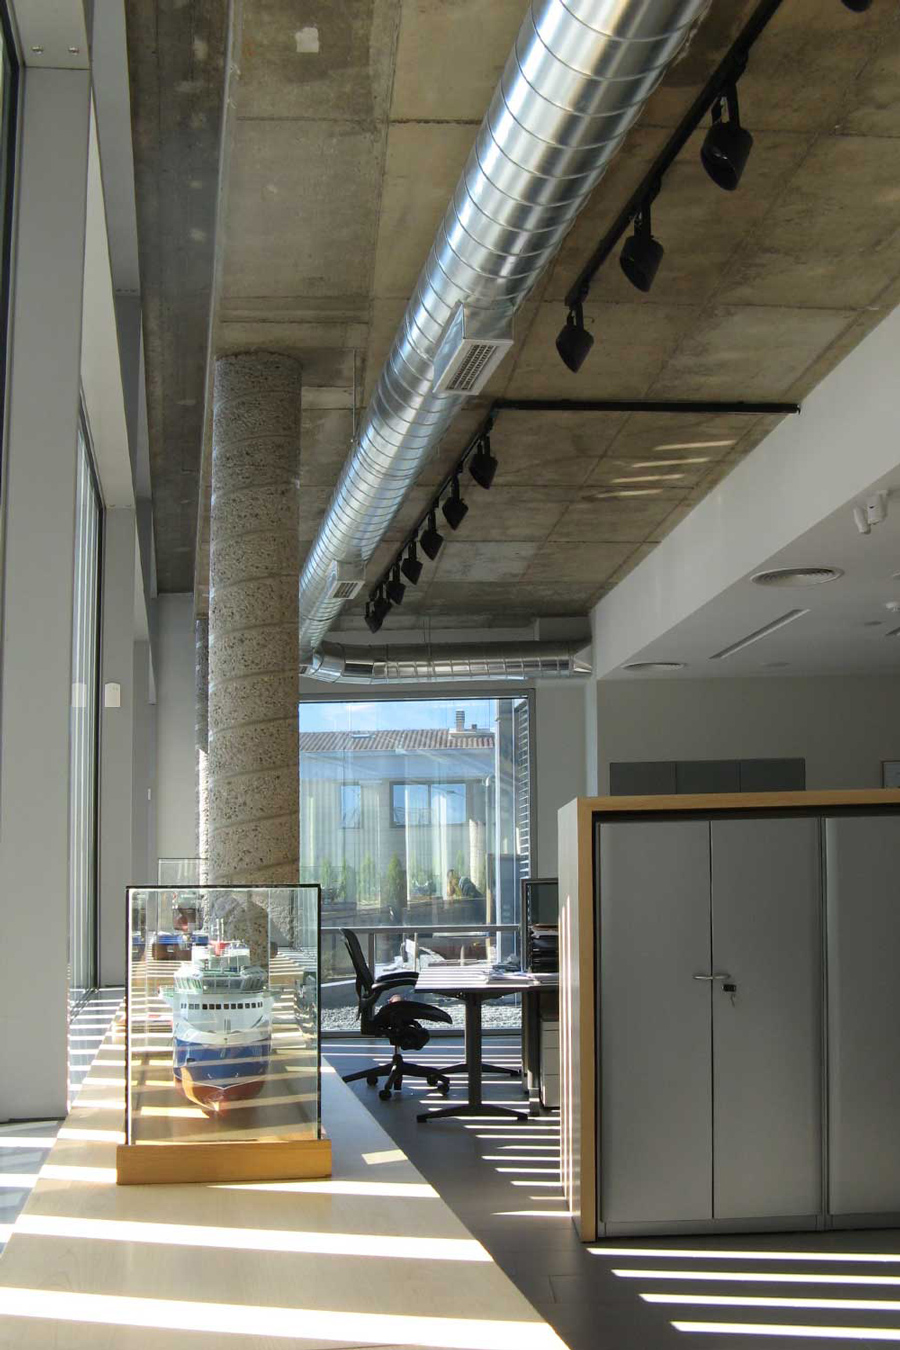 Corridor spaces leading to meeting rooms